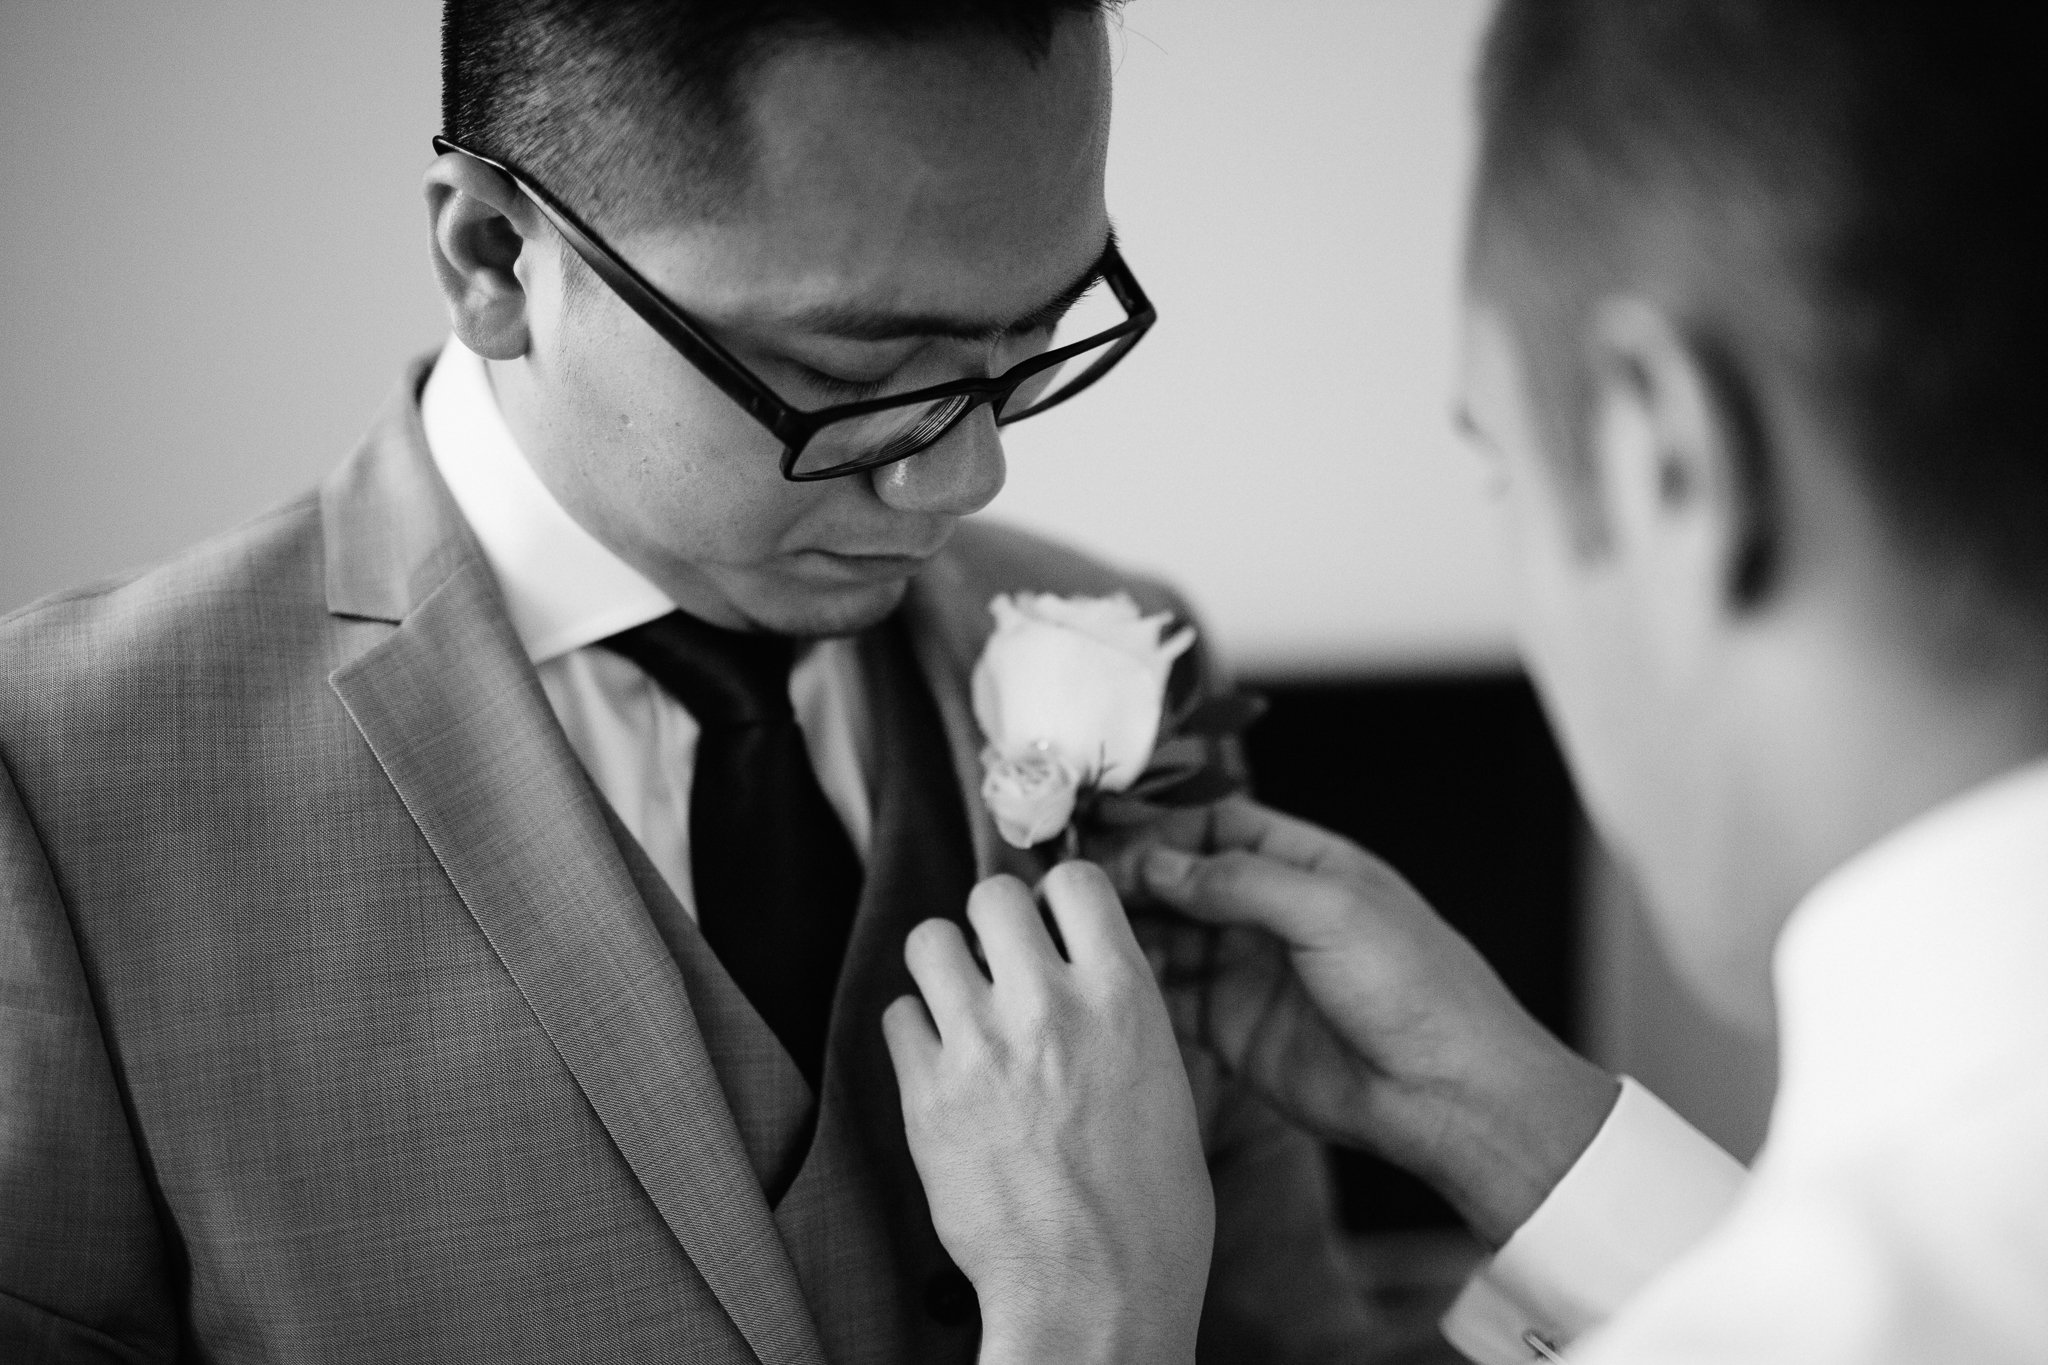  Groom has button hole pinned to his suit 